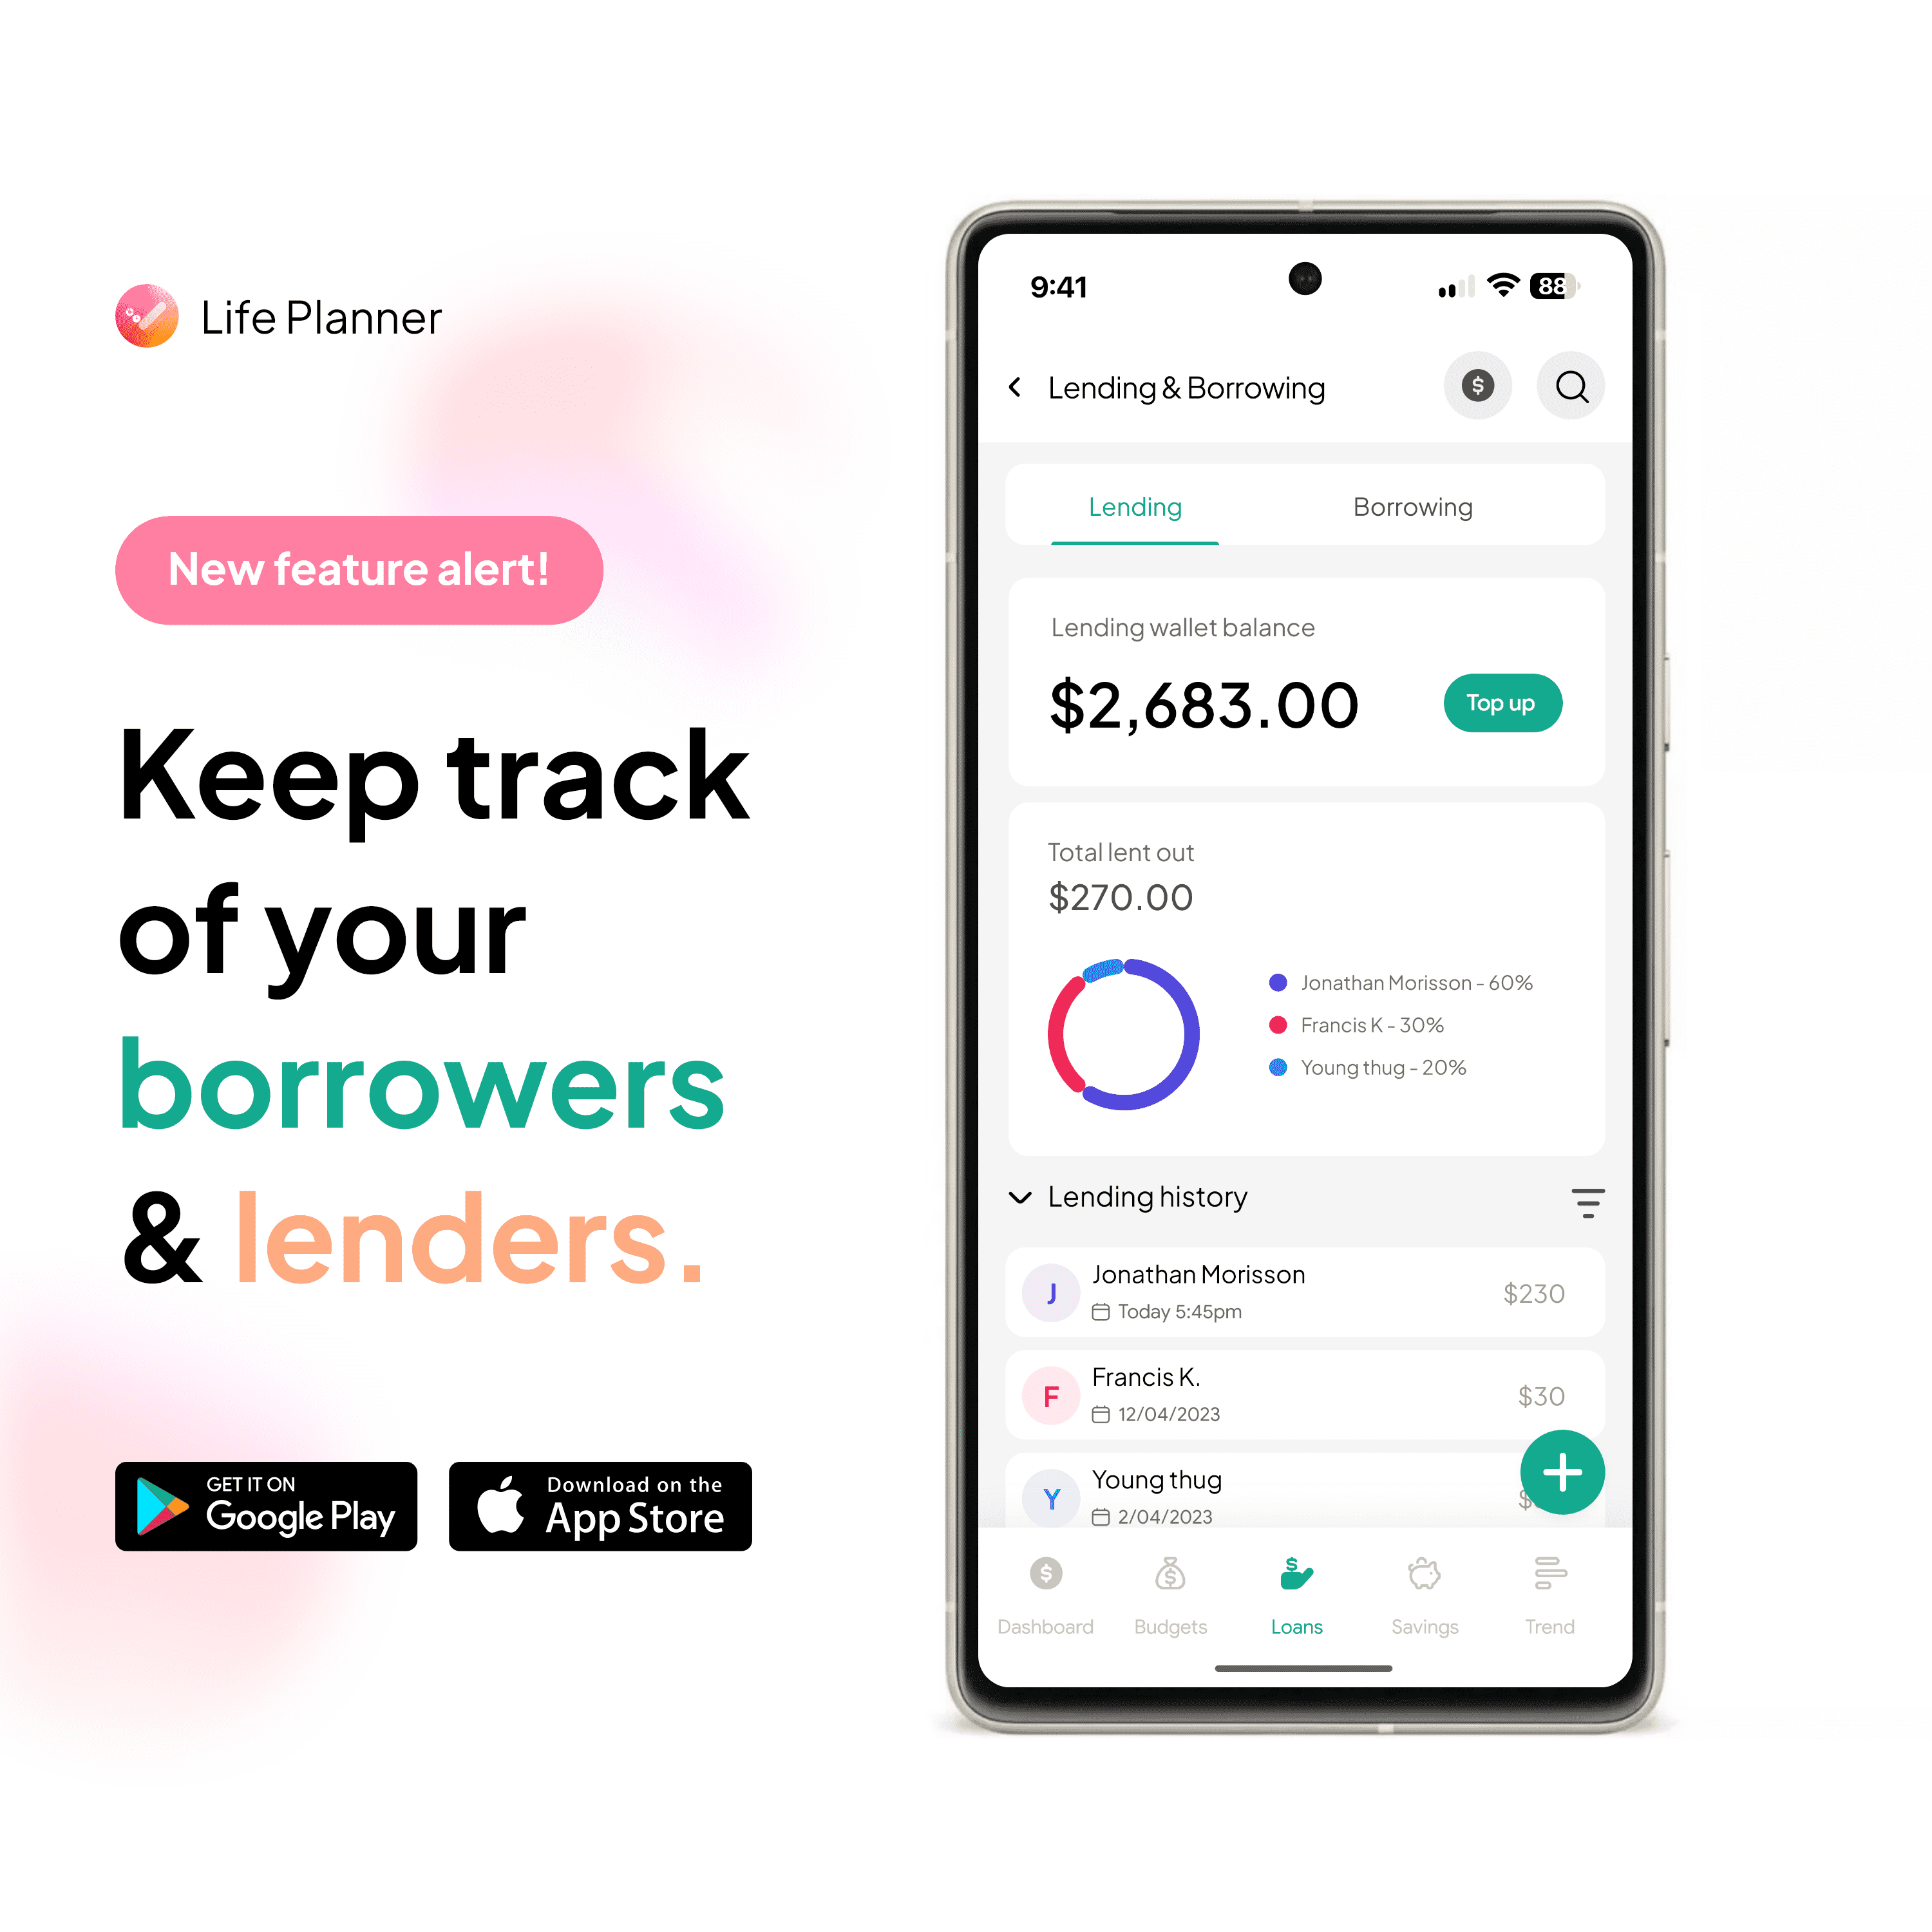 Life Planner Loan and Lending Tracking Features